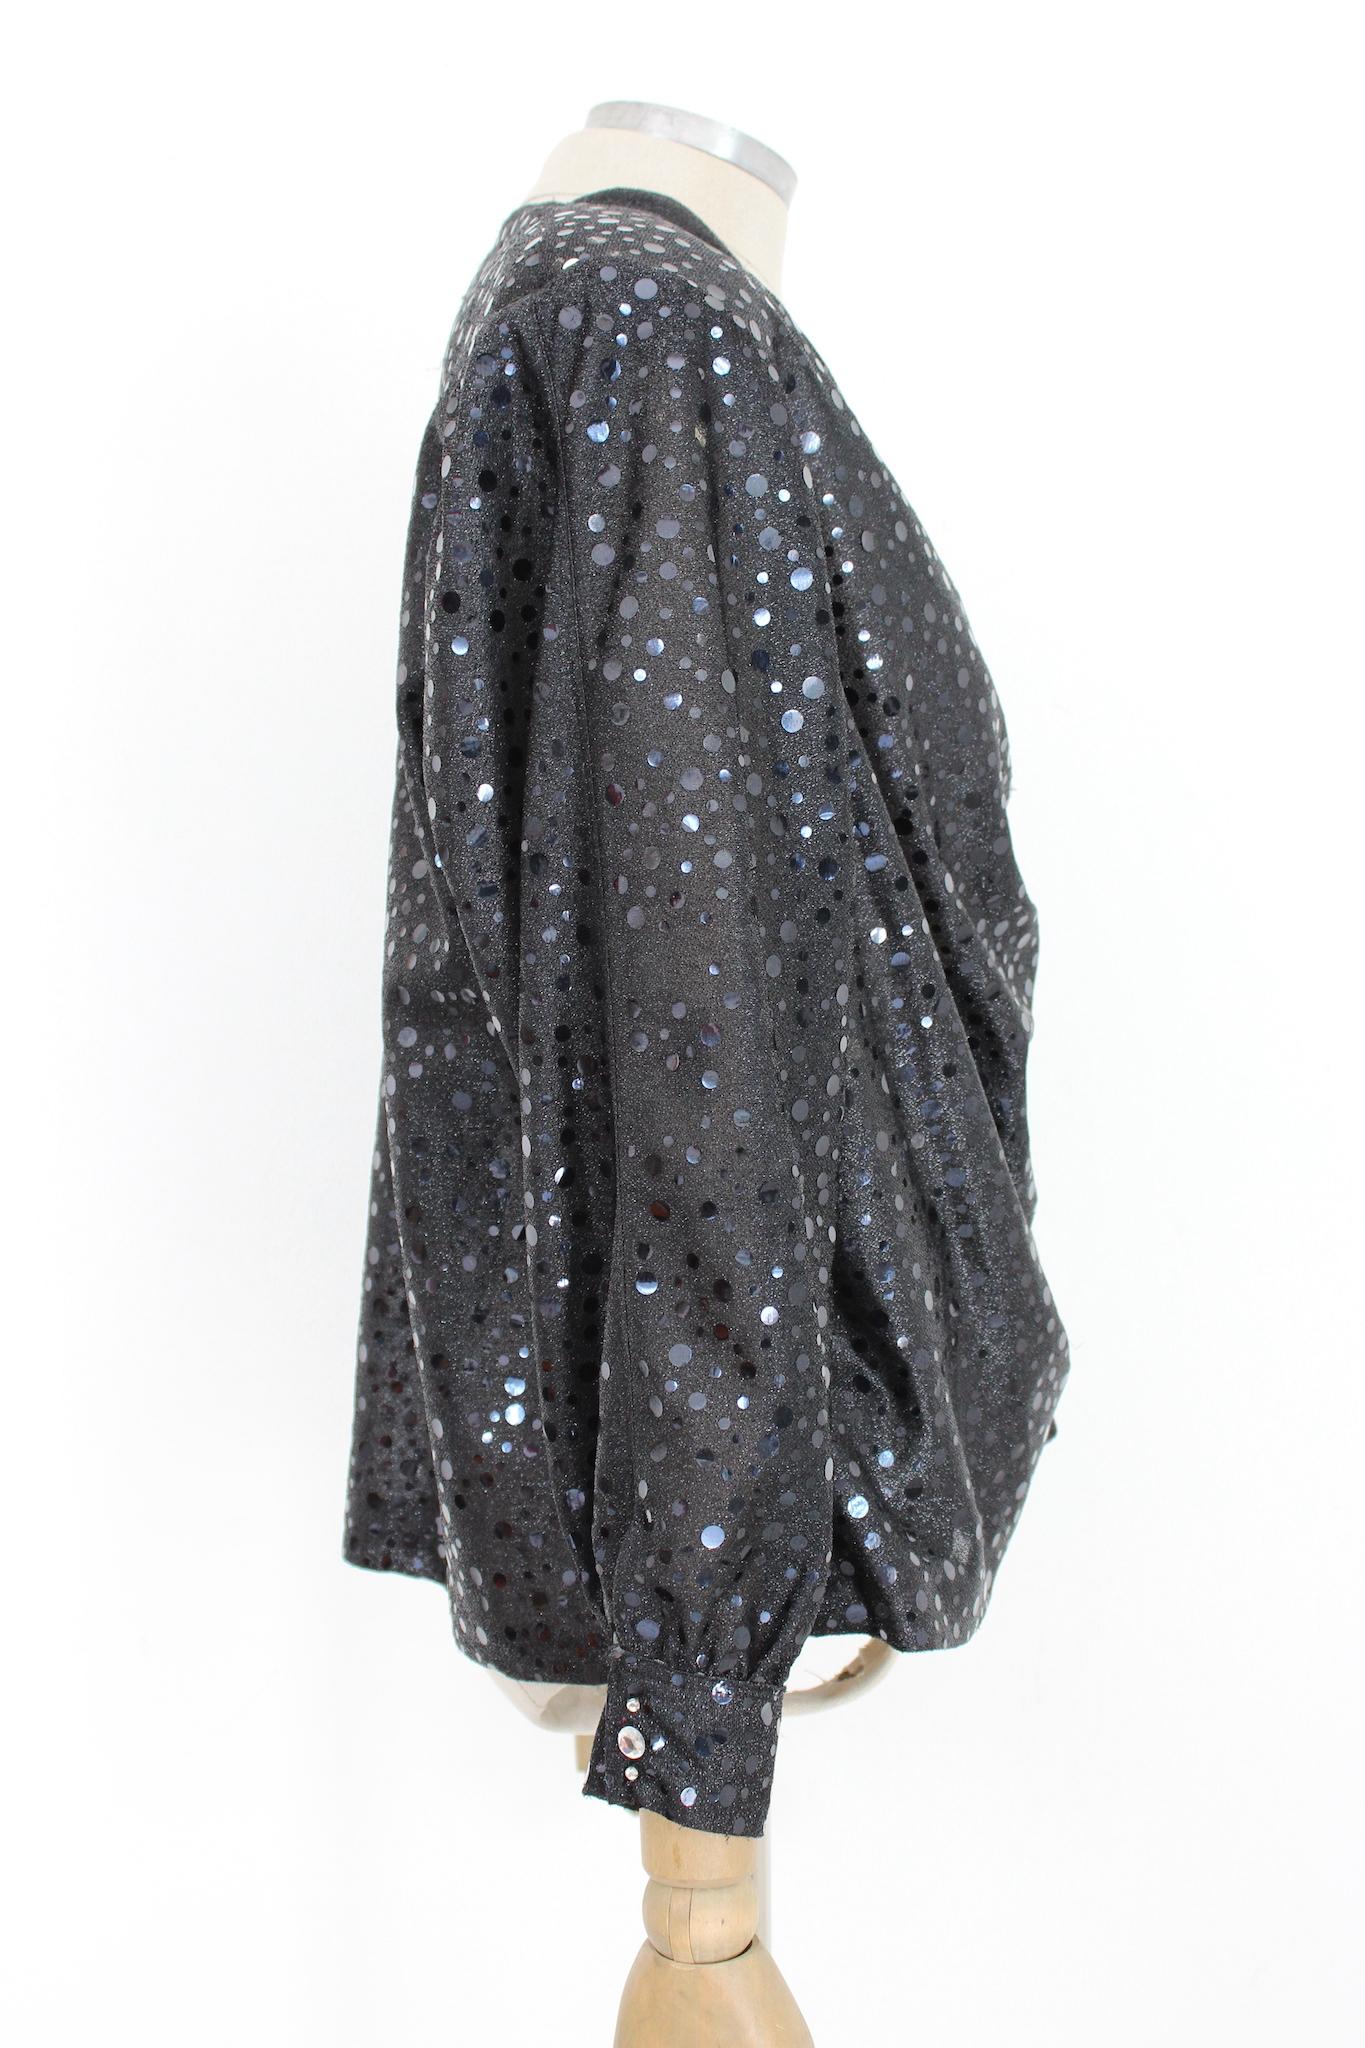 Handmade Black Sequins Vintage Evening Shirt In Excellent Condition For Sale In Brindisi, Bt